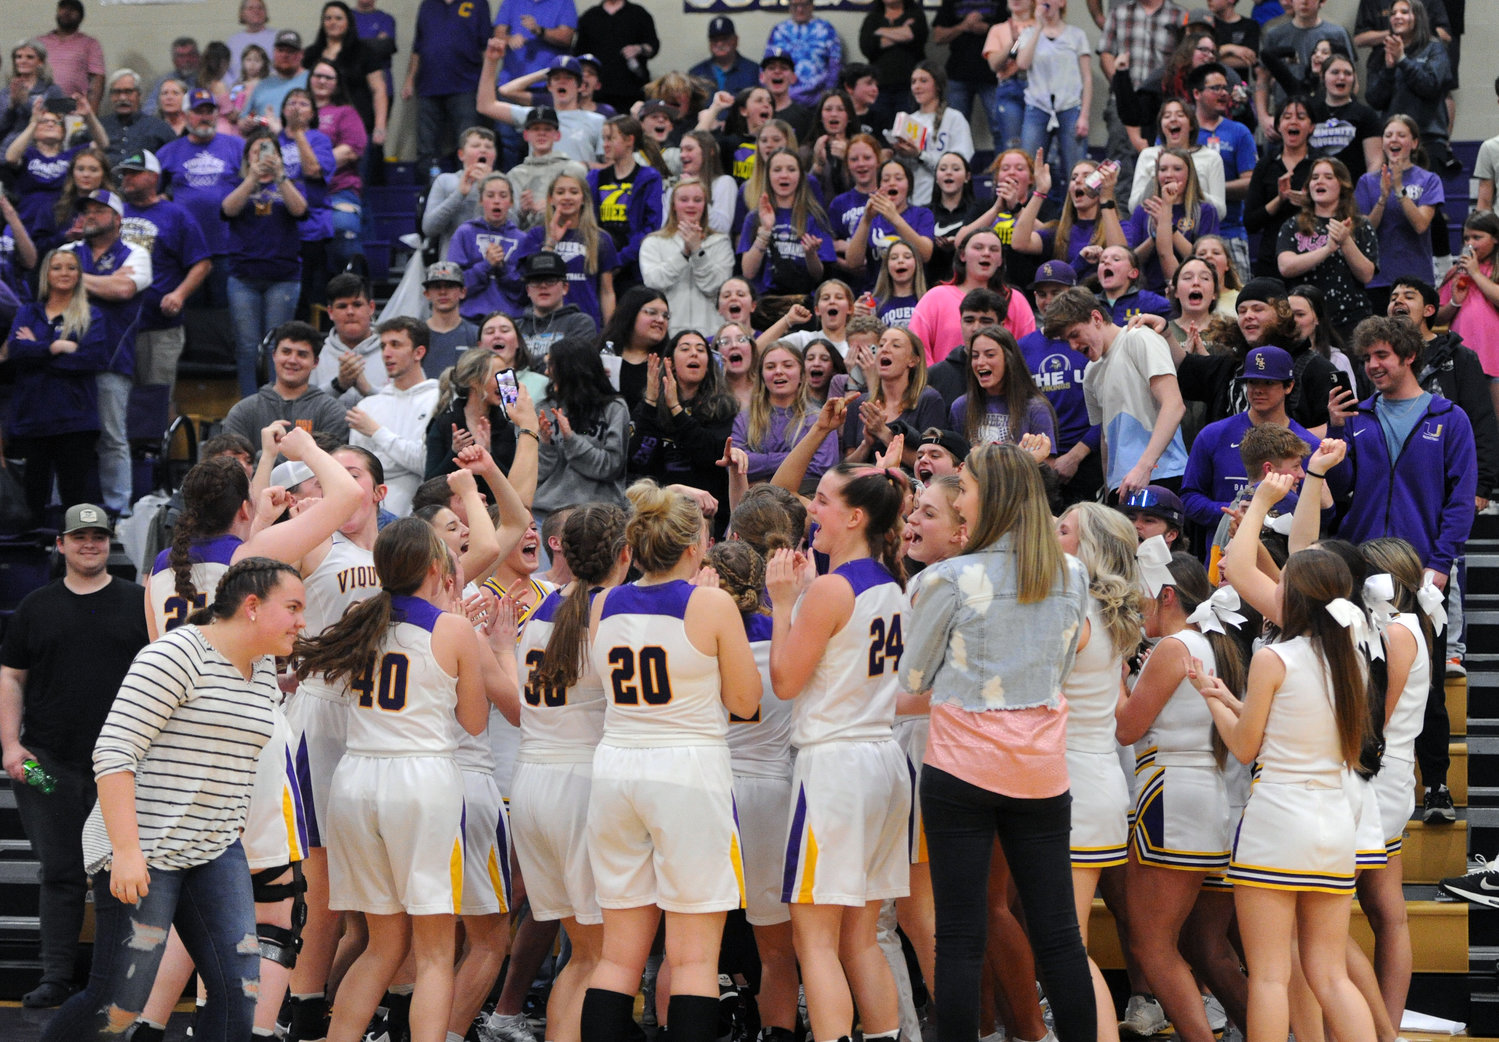 After the final buzzer sounded, the Community Viqueens rush to celebrate their second-straight region title with the student section.